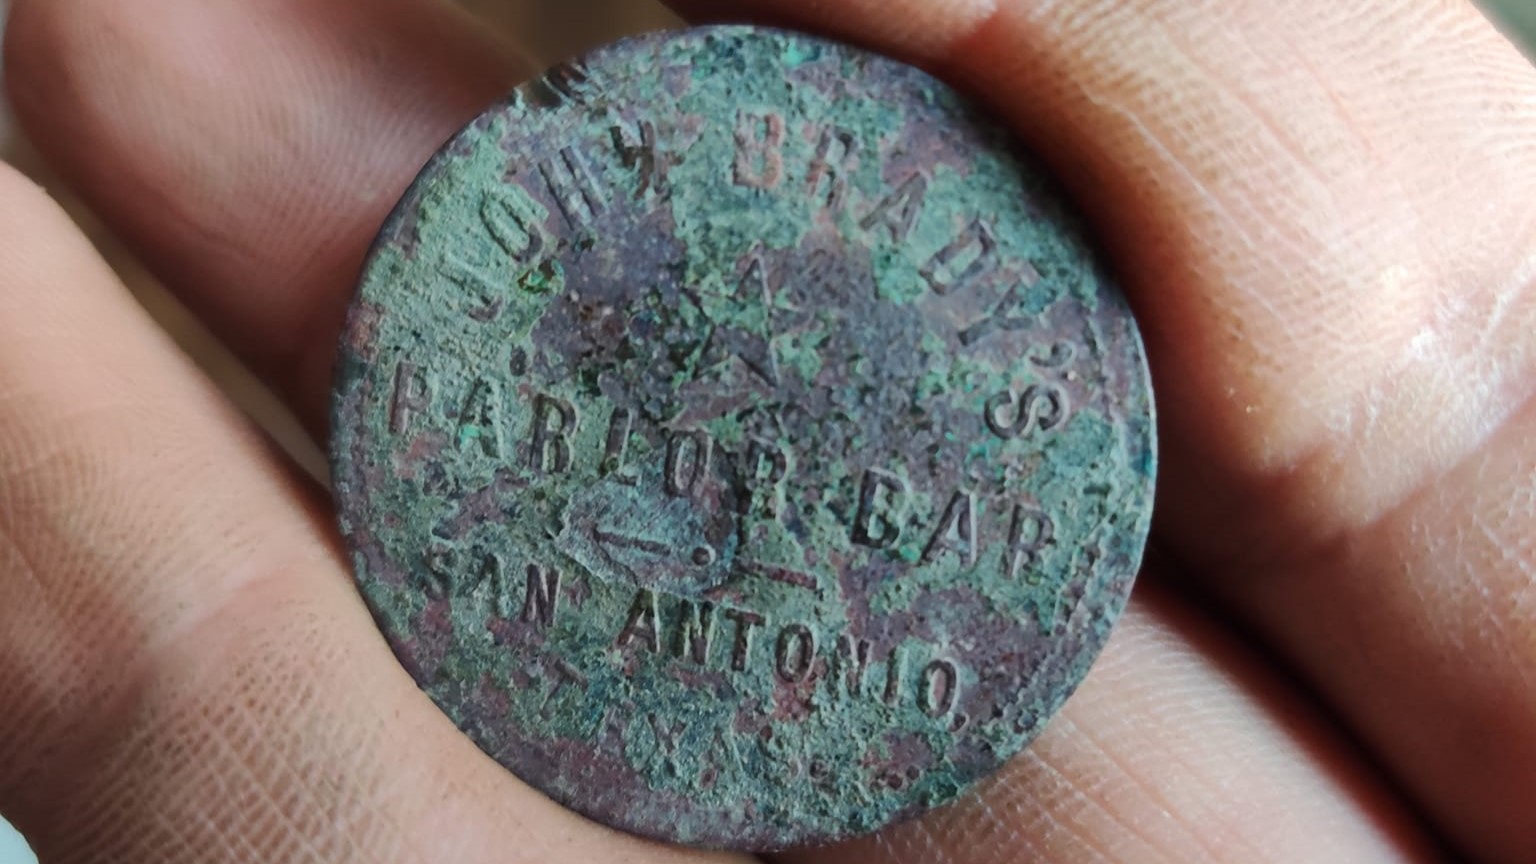  Texas man finds century-old IOU coin from pre-Prohibition bar 